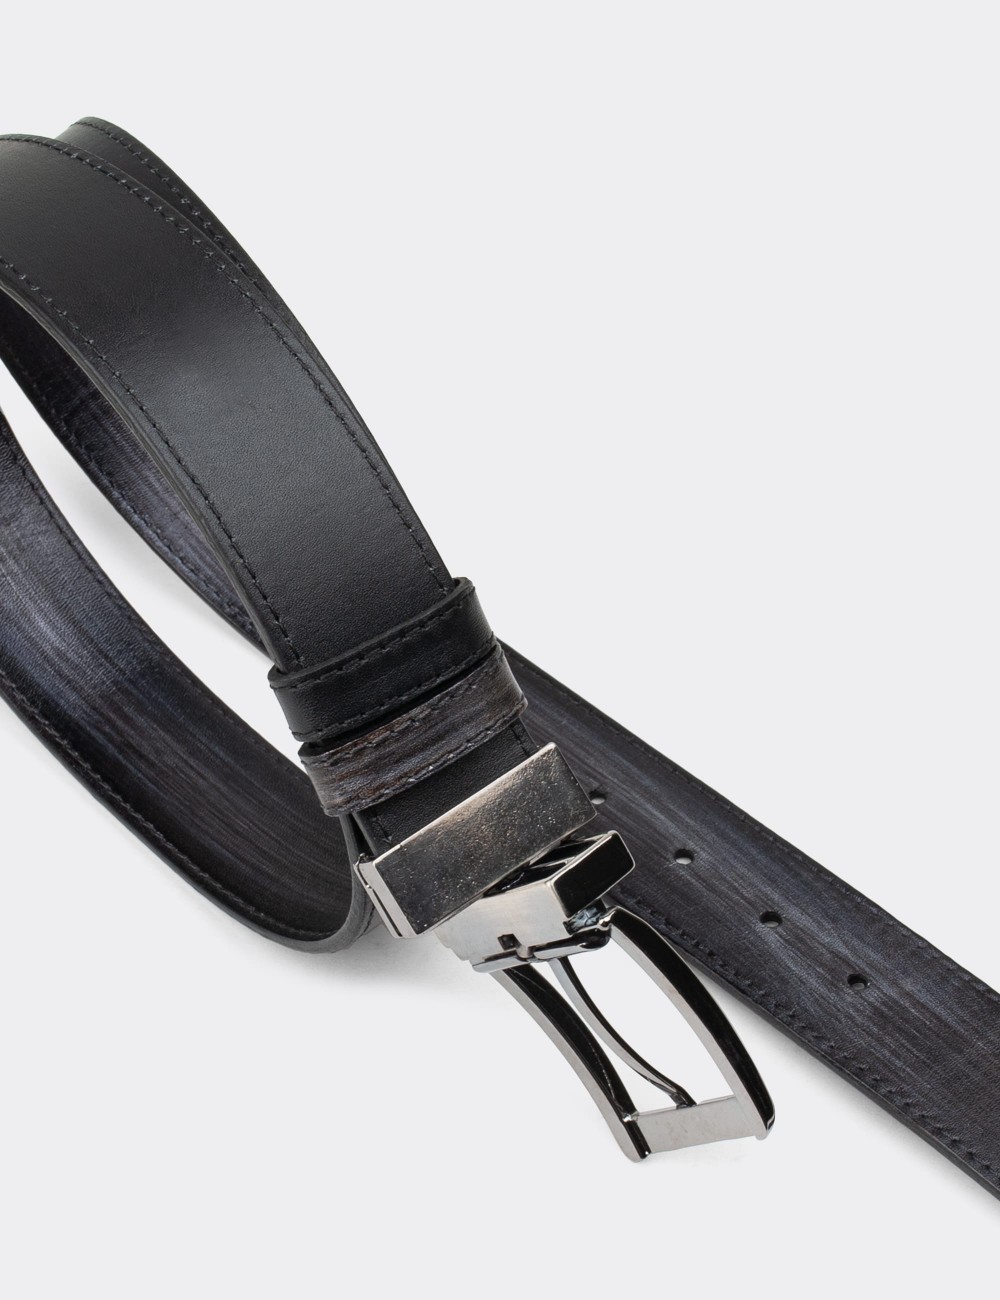  Leather Gray and Black Double Sided Men's Belt - K0409MGRIW01